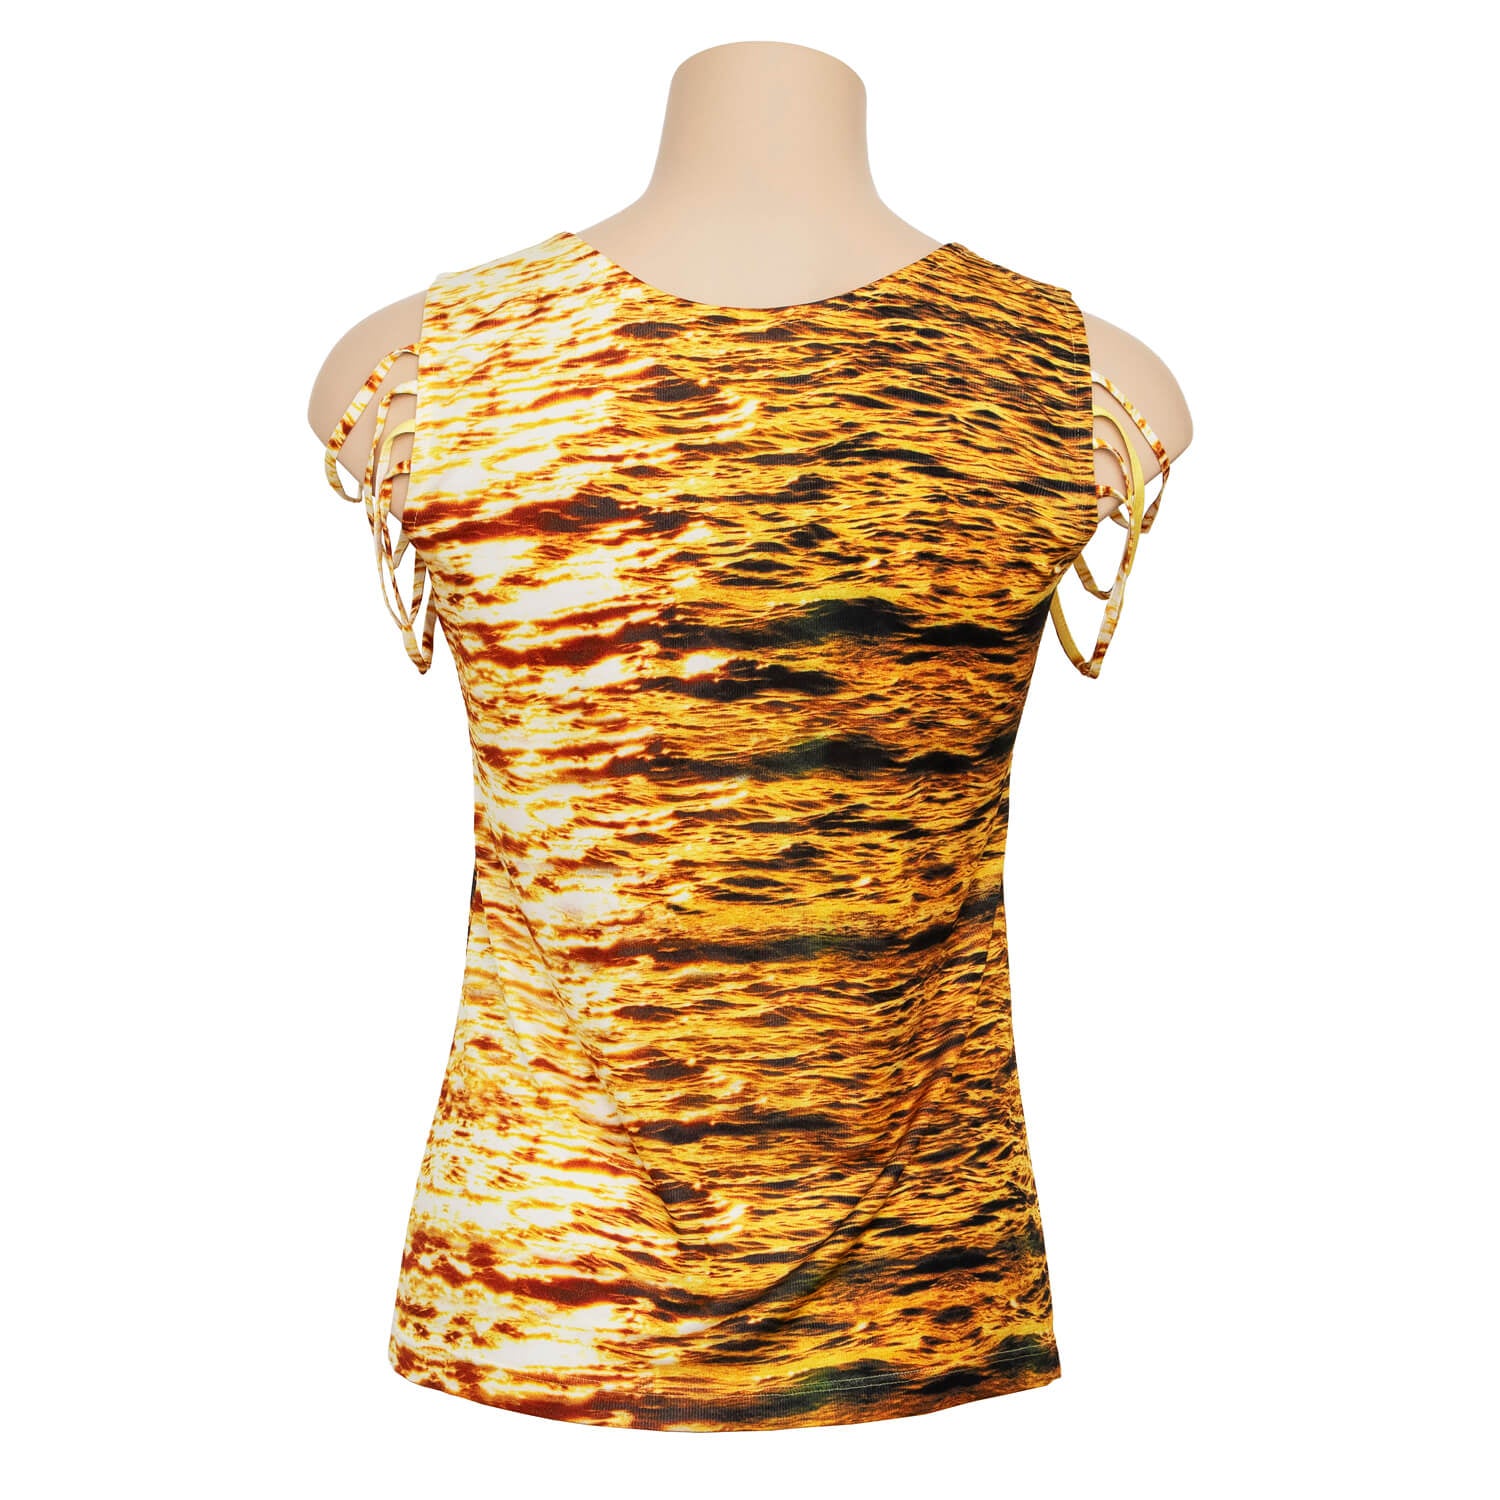 back view midas touch gold silk jersey strappy top all water print